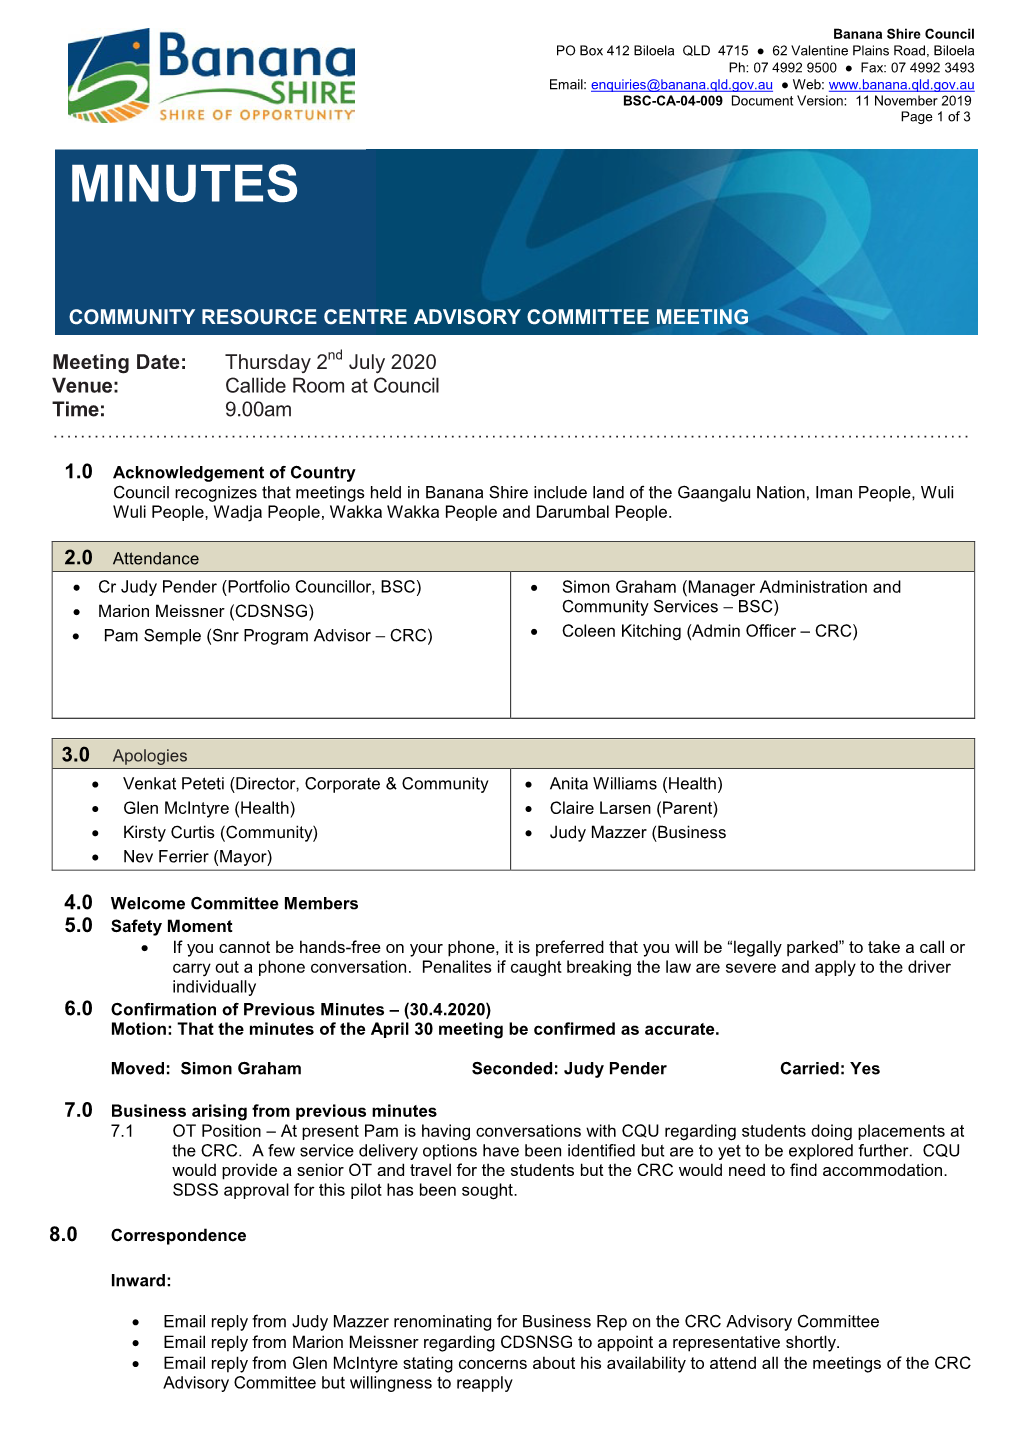 Confirmed CRC Advisory Committee Meeting Minutes 2 July 2020.Pdf